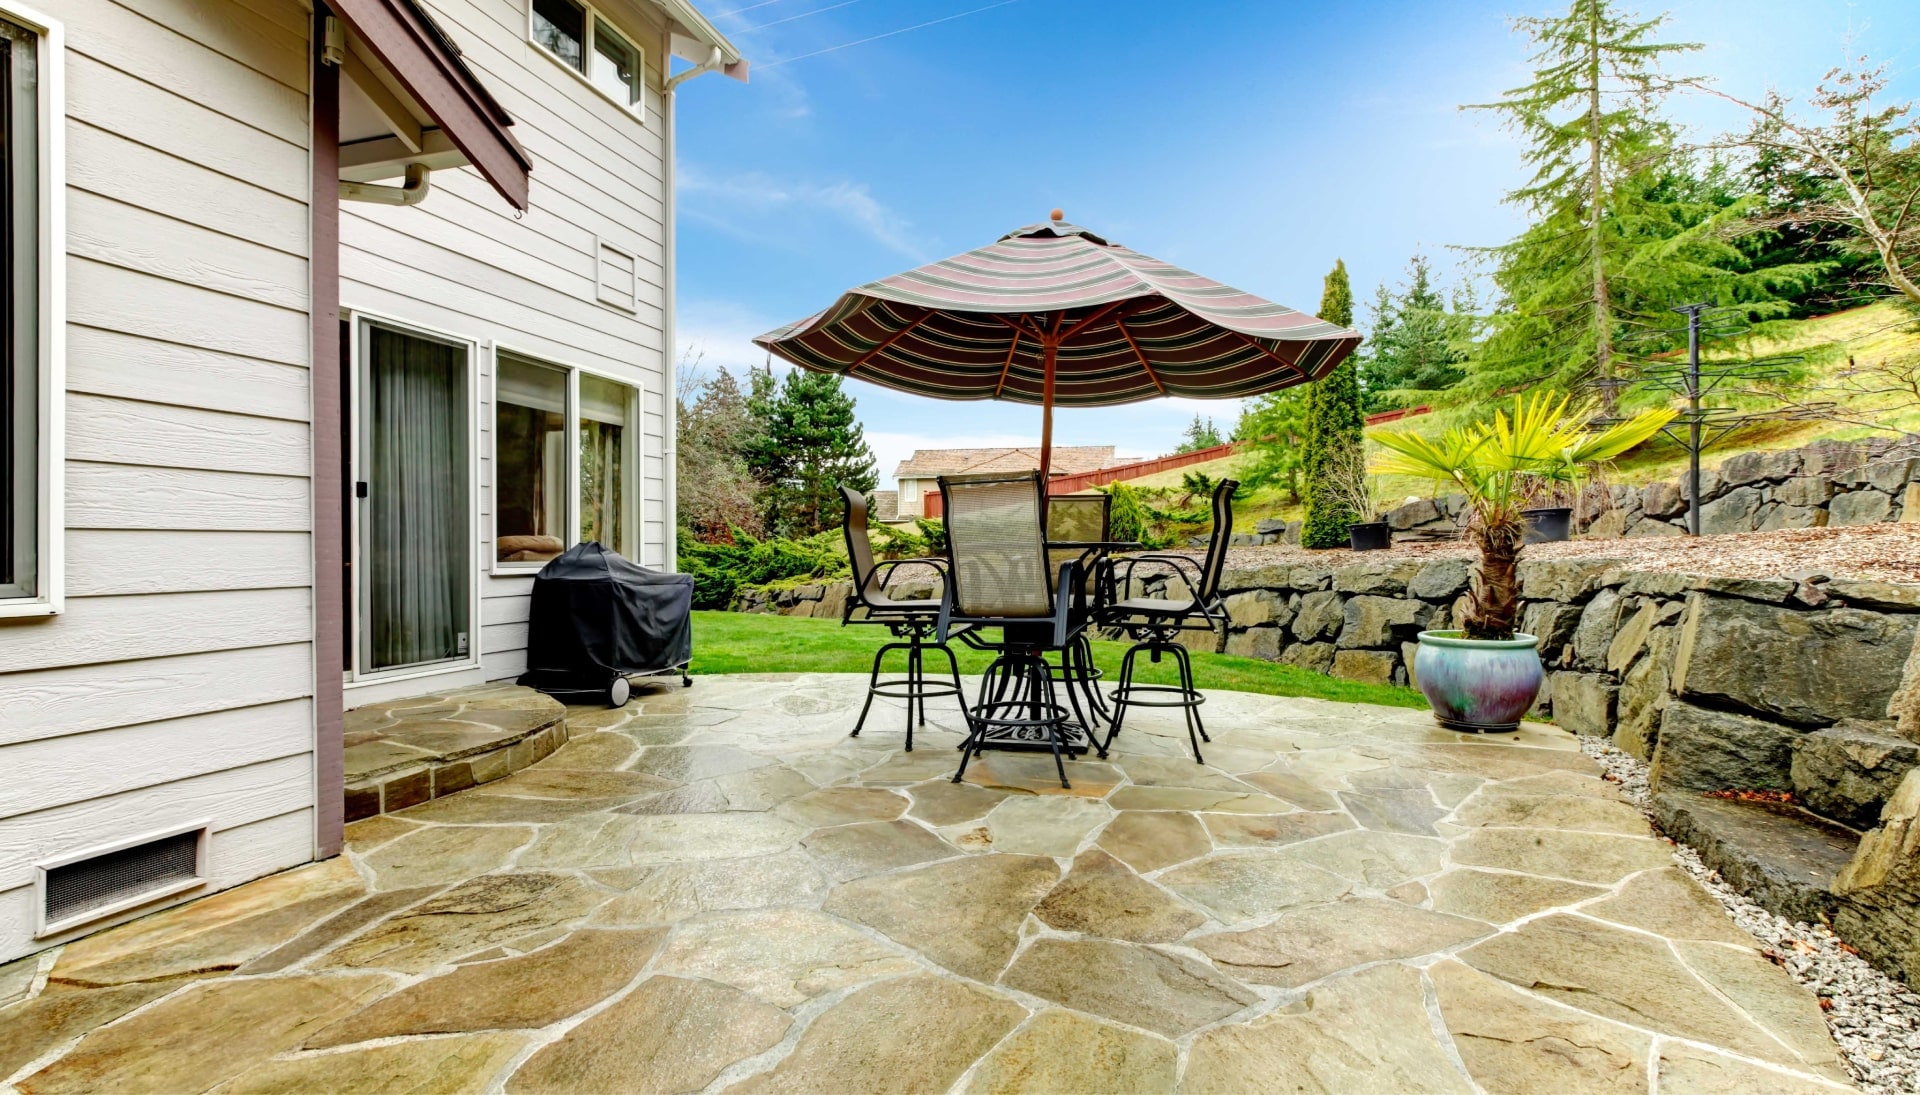 Beautifully Textured and Patterned Concrete Patios in Ogden, Utah